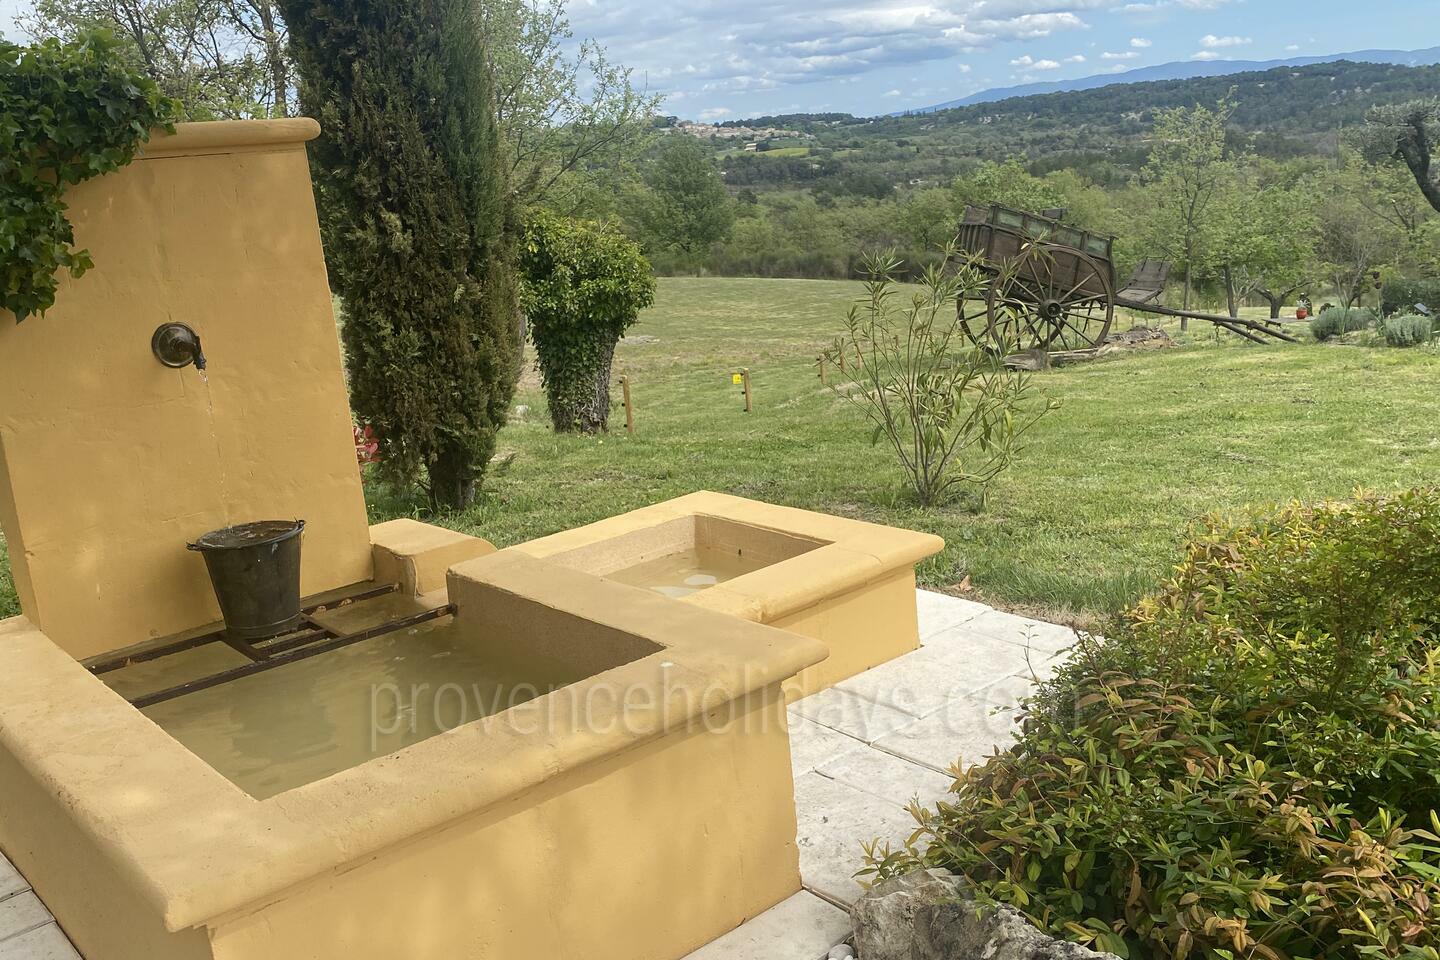 11 - Recently restored bastide with heated swimming pool: Villa: Exterior